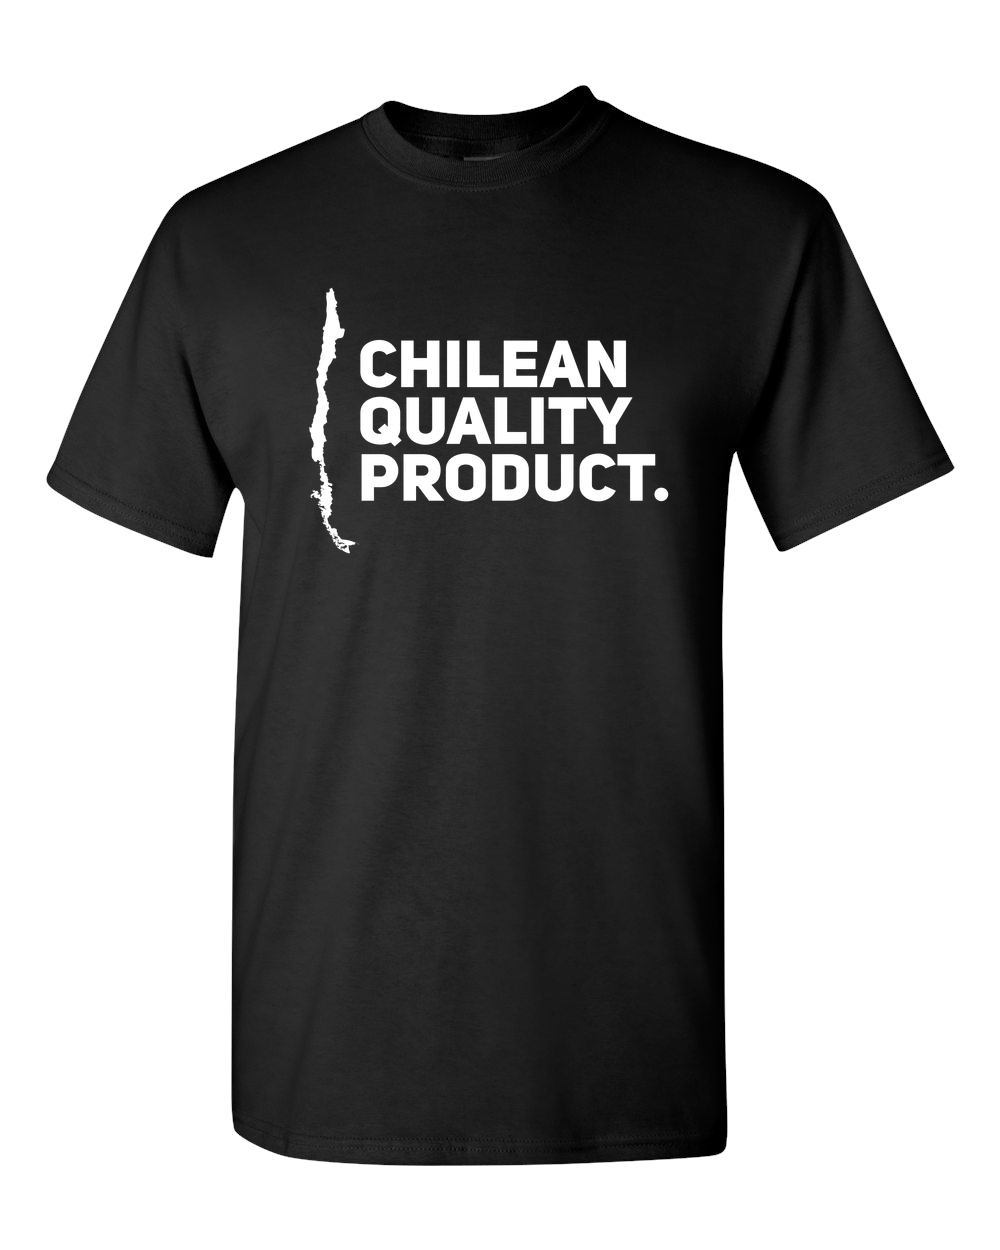 Chile Adult Unisex T-Shirt Chilean Funny Shirt "CHILEAN QUALITY PRODUCT"